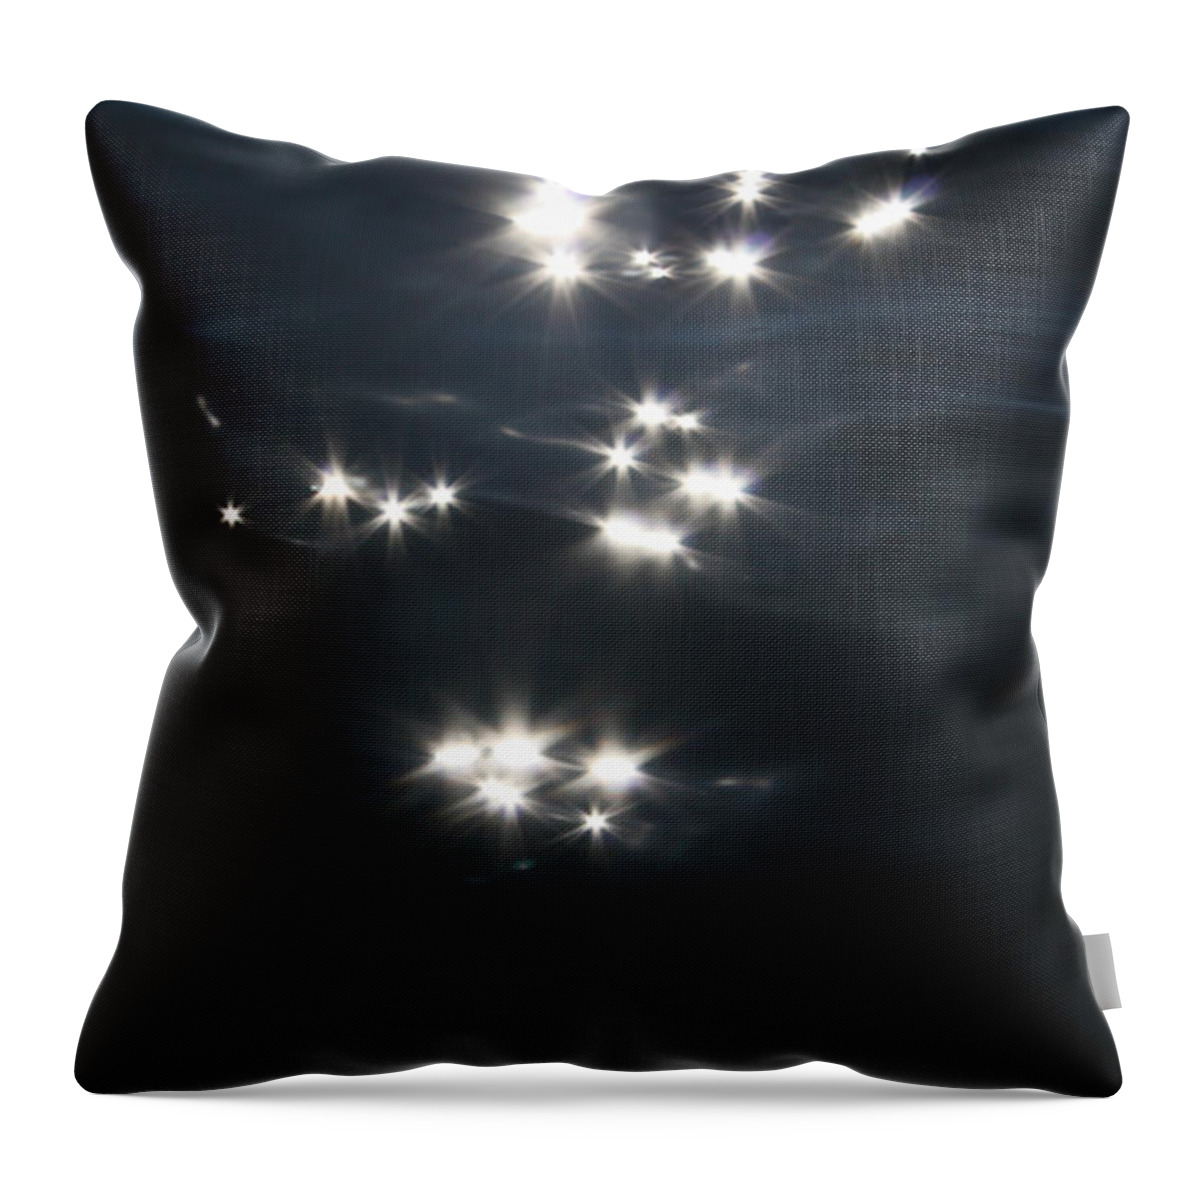 Stars Throw Pillow featuring the photograph Stars On The Water by Cathie Douglas